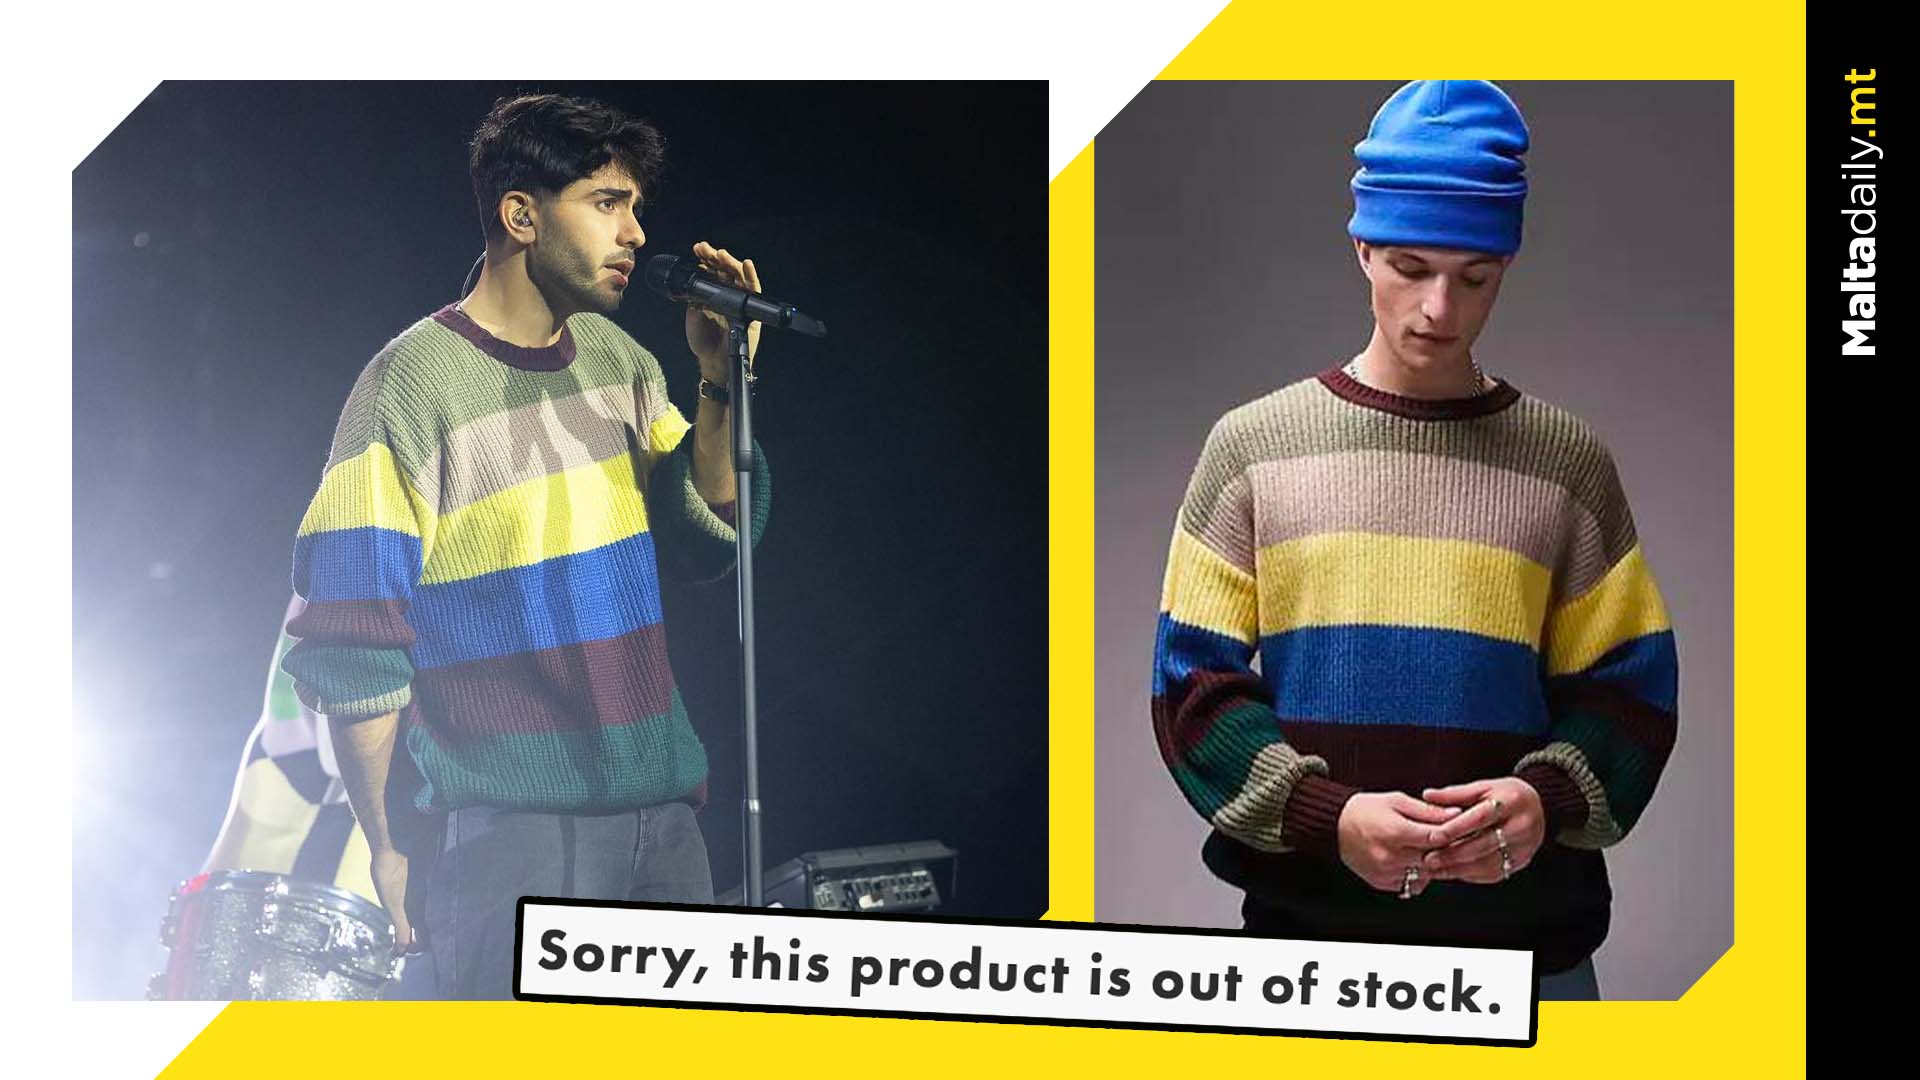 The Busker sweater sold out on ASOS as fans ask for it